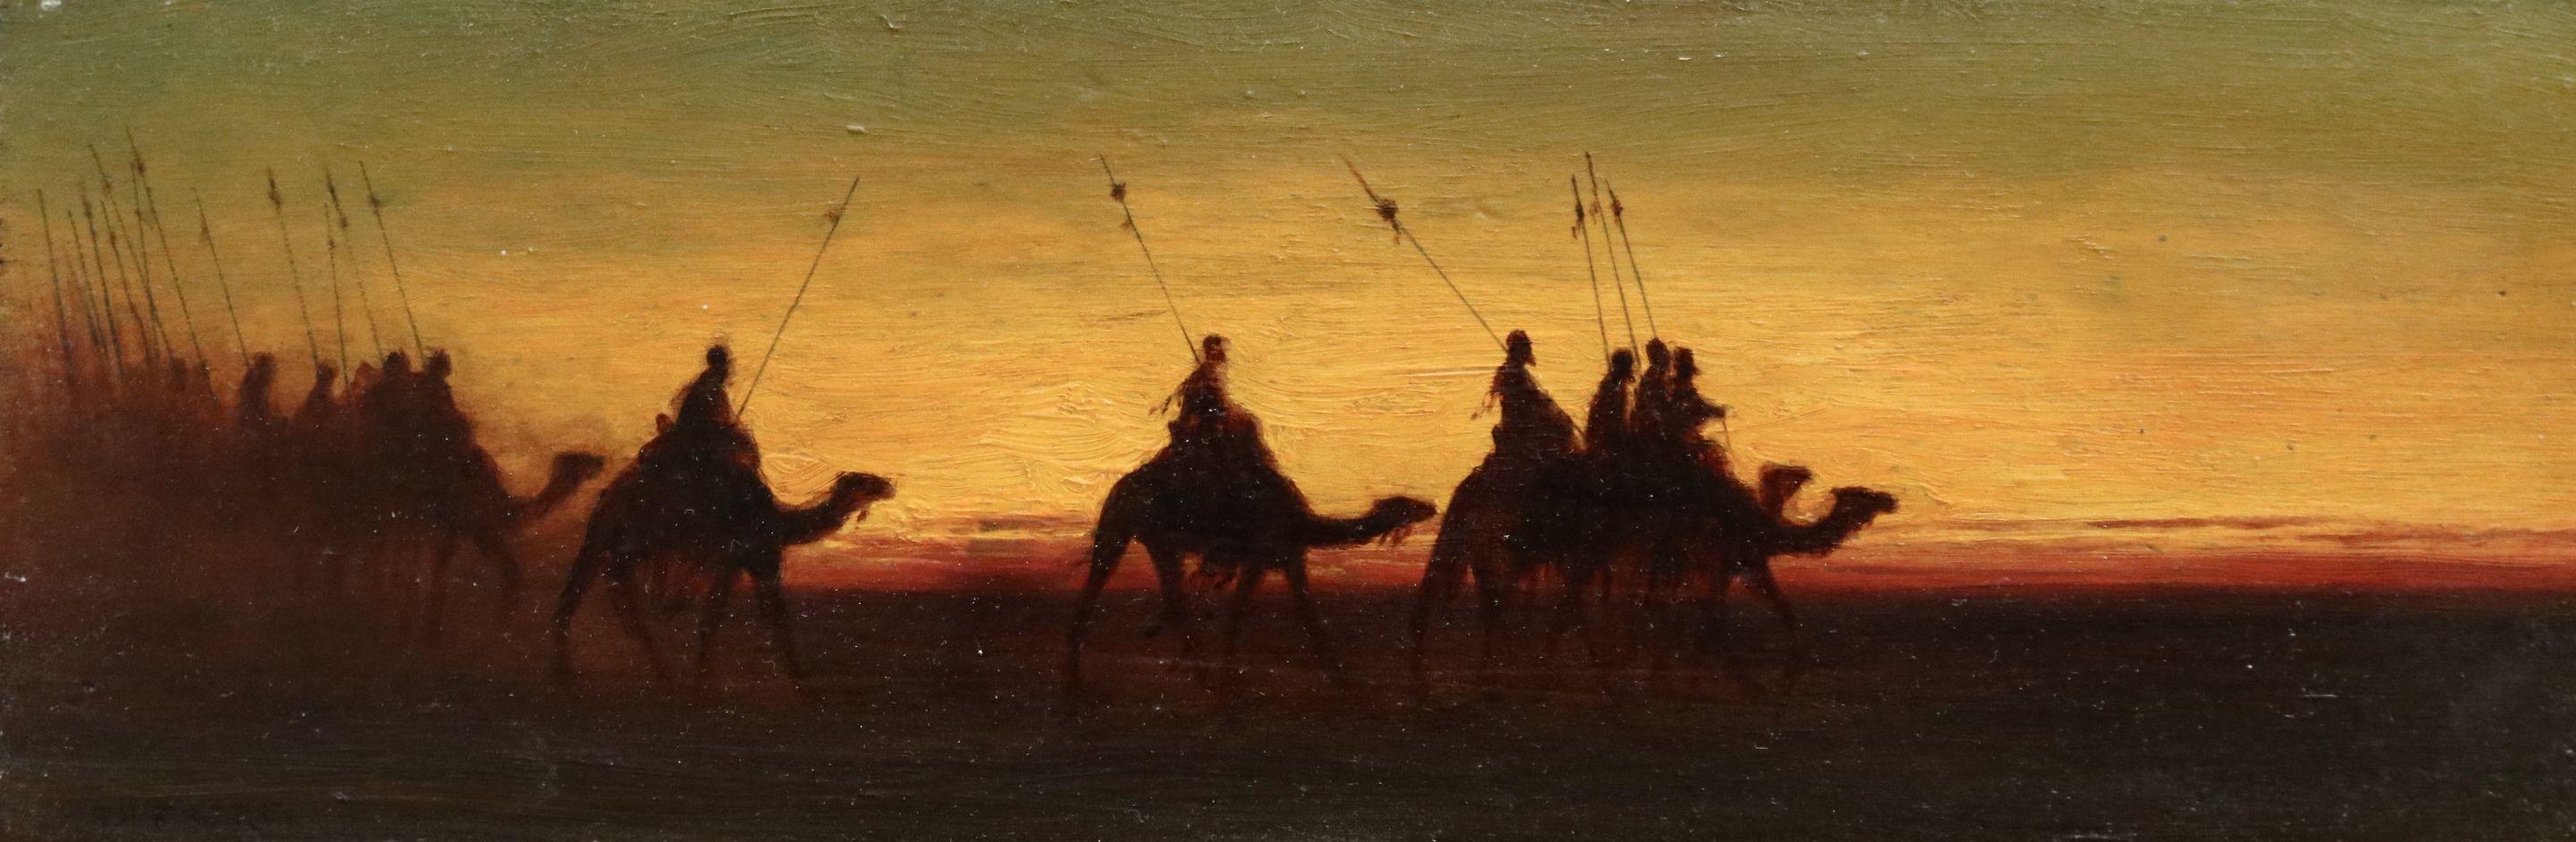 Theodore Frère Animal Painting - The Caravan - Evening - 19th Century Oil, Figures on Camels in Landscape - Frere